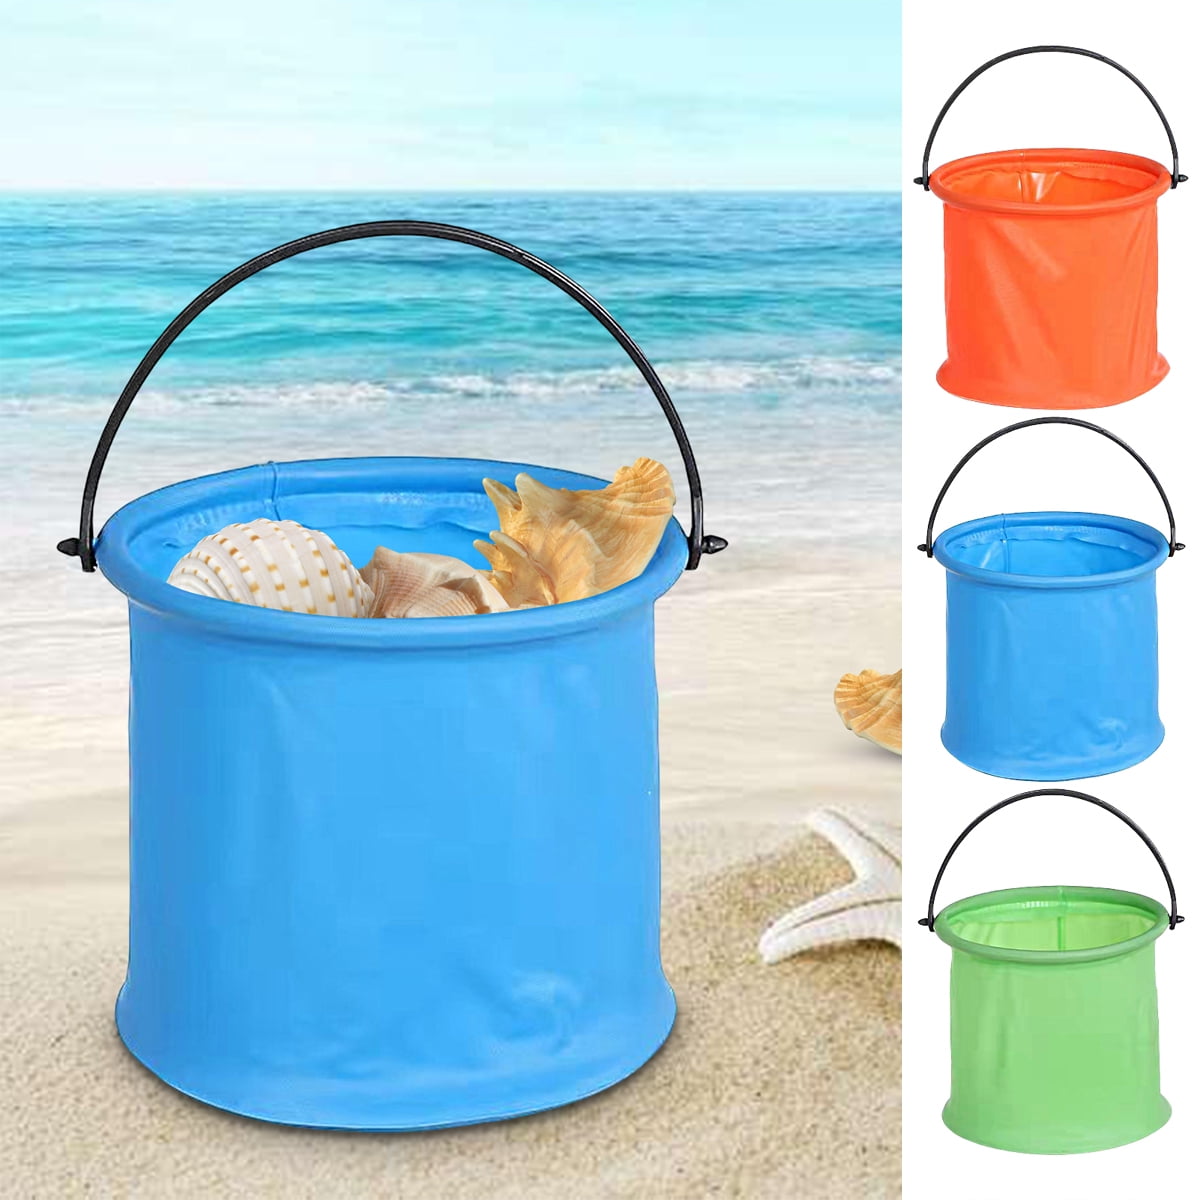 NLGToy Collapsible Bucket Compact 2-Liter Silicone Folding Bucket Kids Beach Play Space Saving Bucket Portable Folding Water Container 